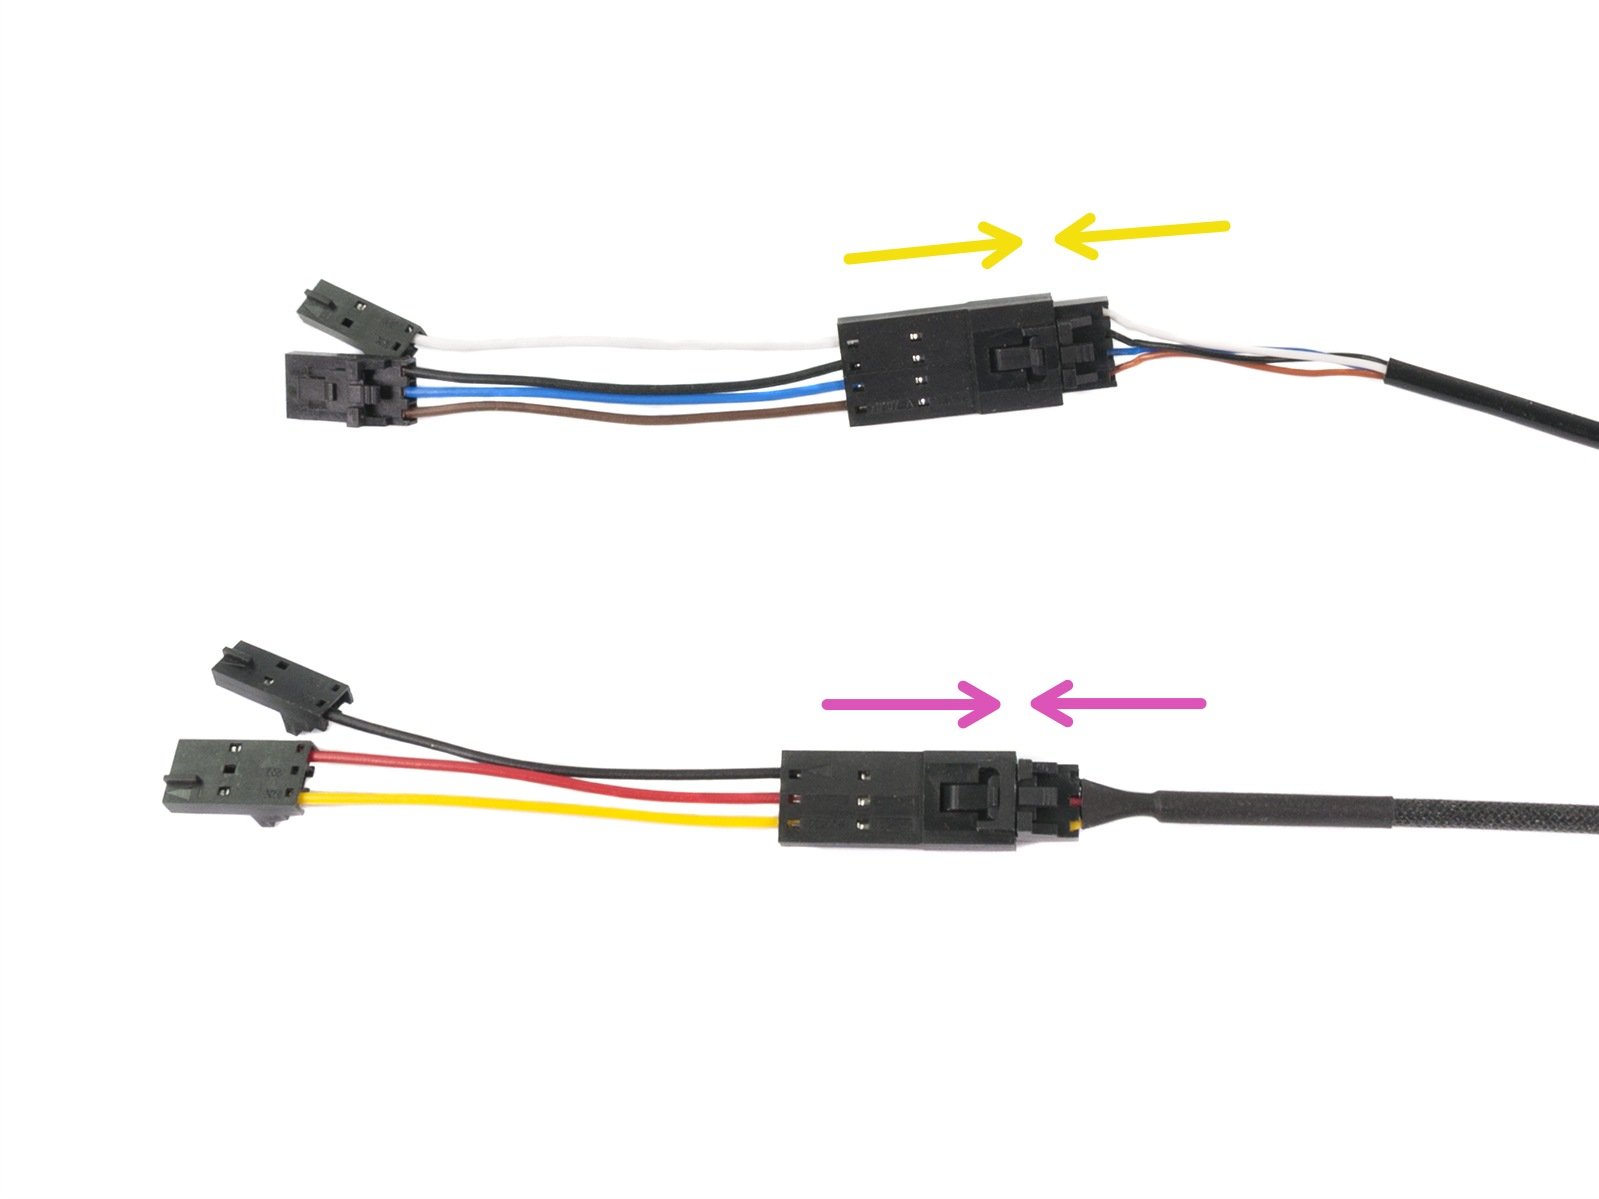 Connecting v-cables to the Extruder cables